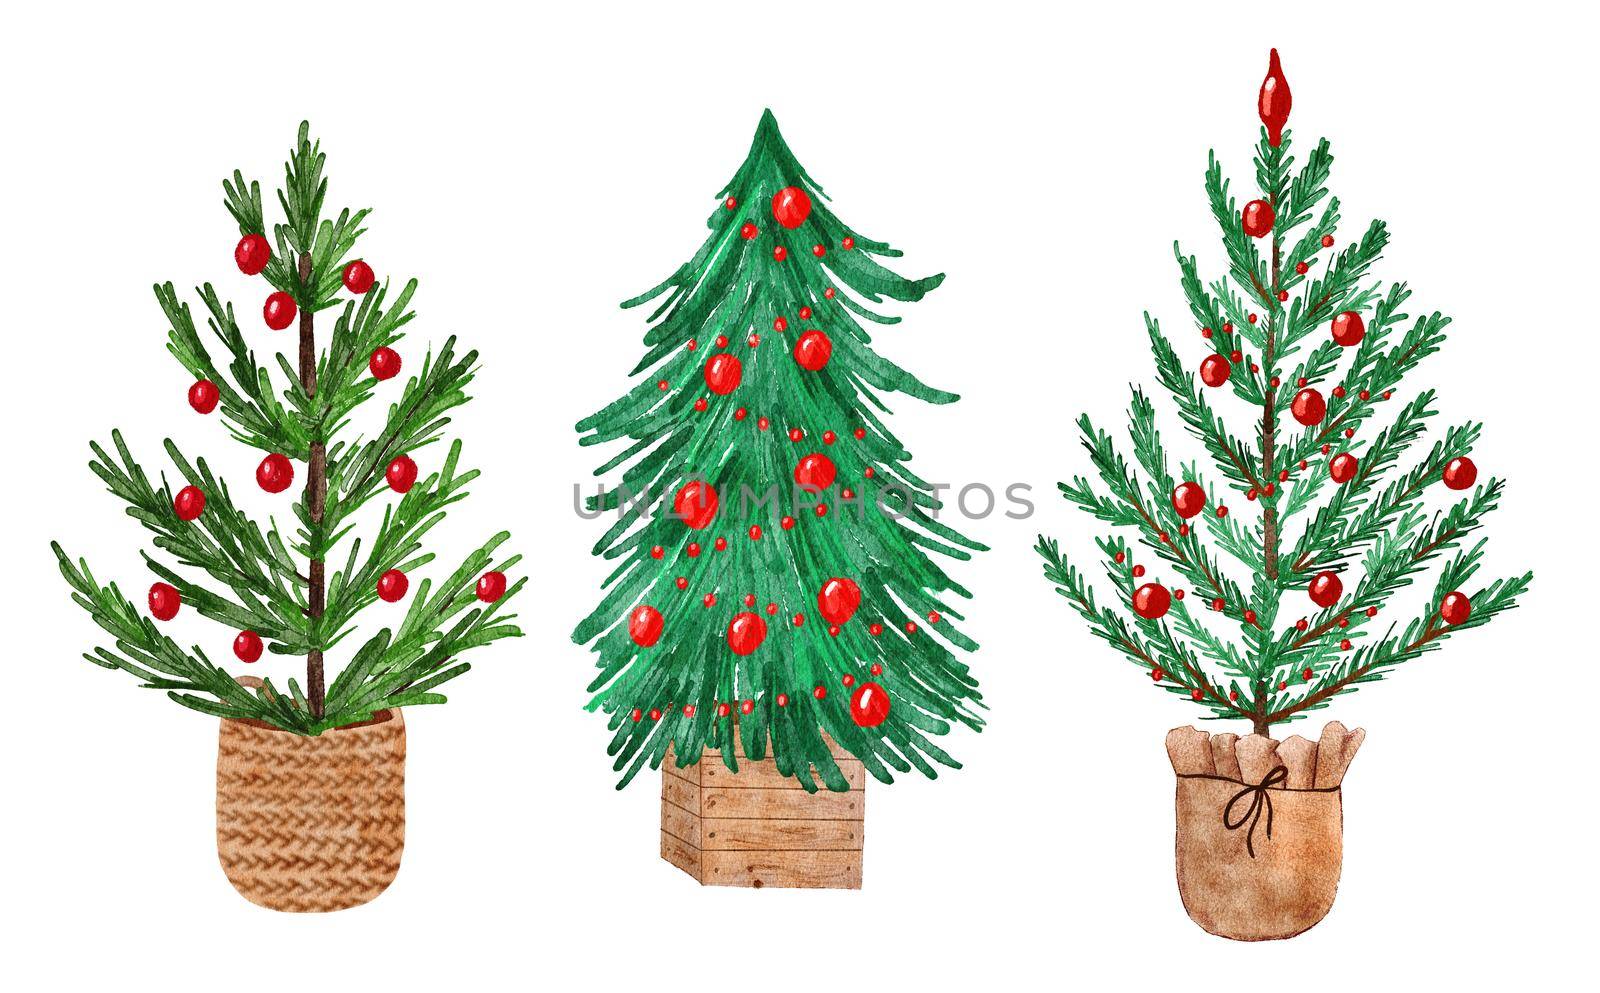 Watercolor hand drawn pine Christmas trees with red ornaments in beige brown scandinavian containers, basket wood crate. Winter holiday spruce fir tree design in nordic minimalist cozy interior trendy style